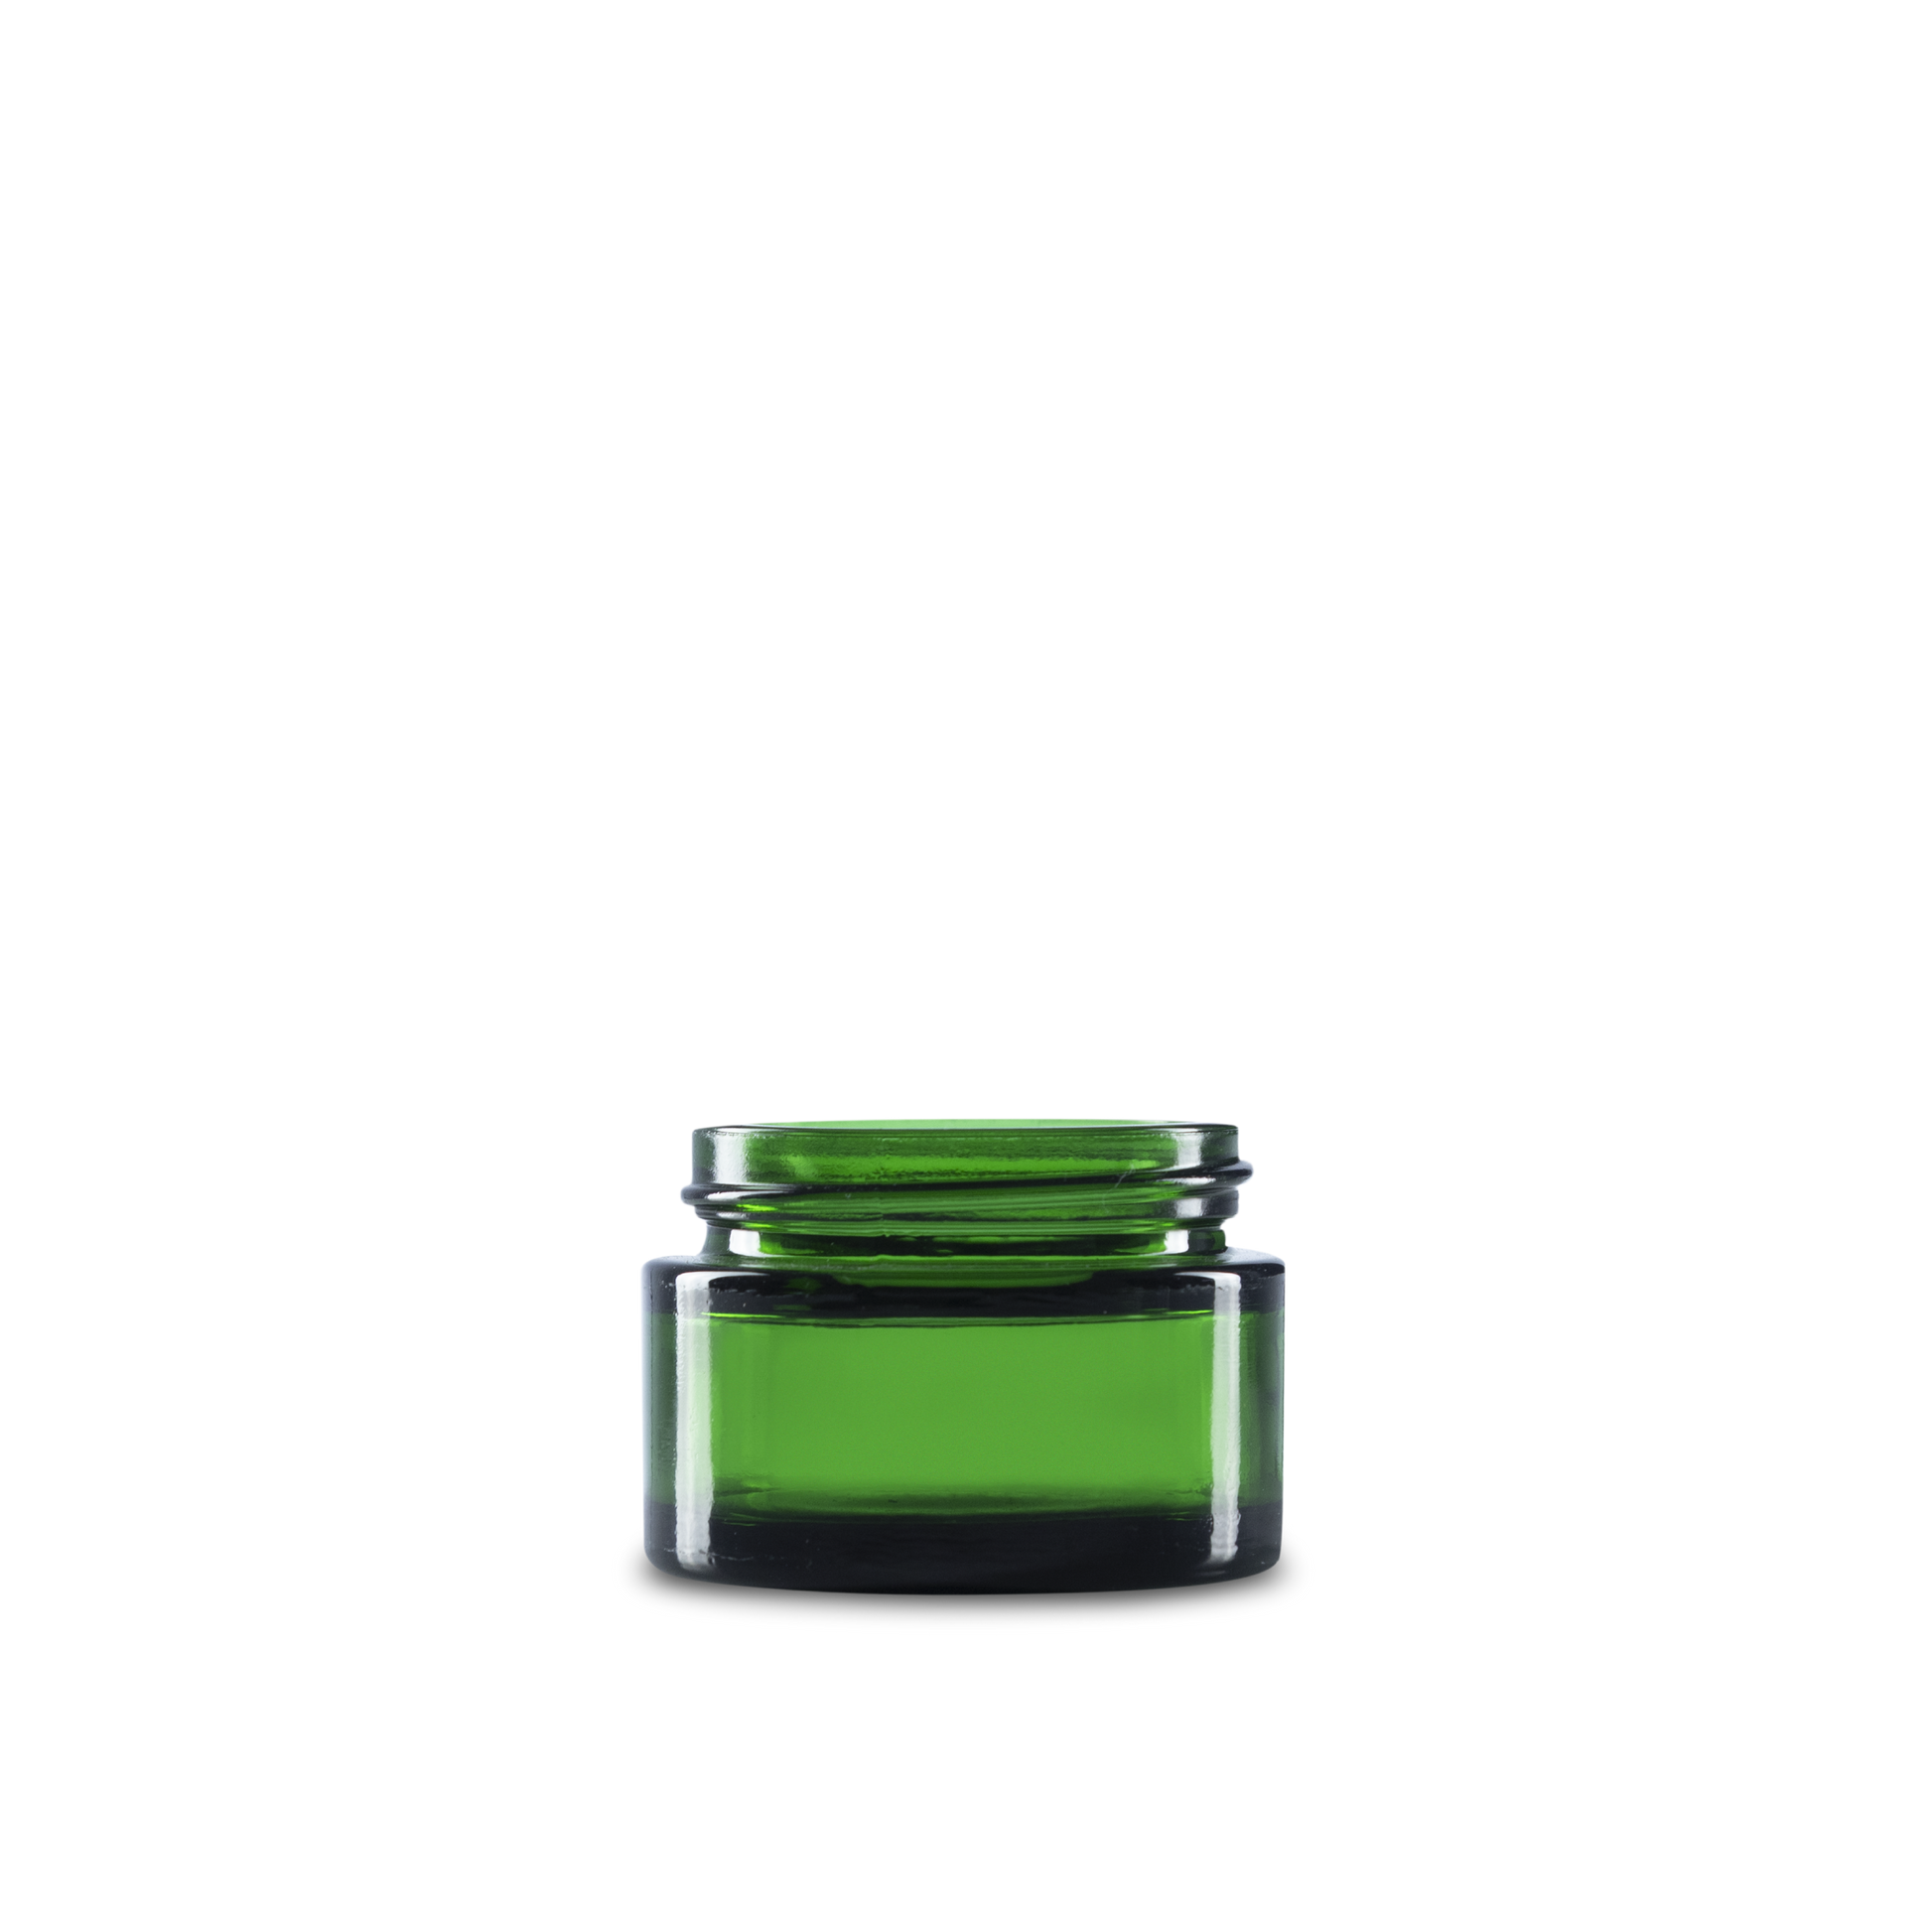 1 oz green glass round jars are a great size for any home, kitchen, or workshop. the glass is durable and thick, so it won't break easily.